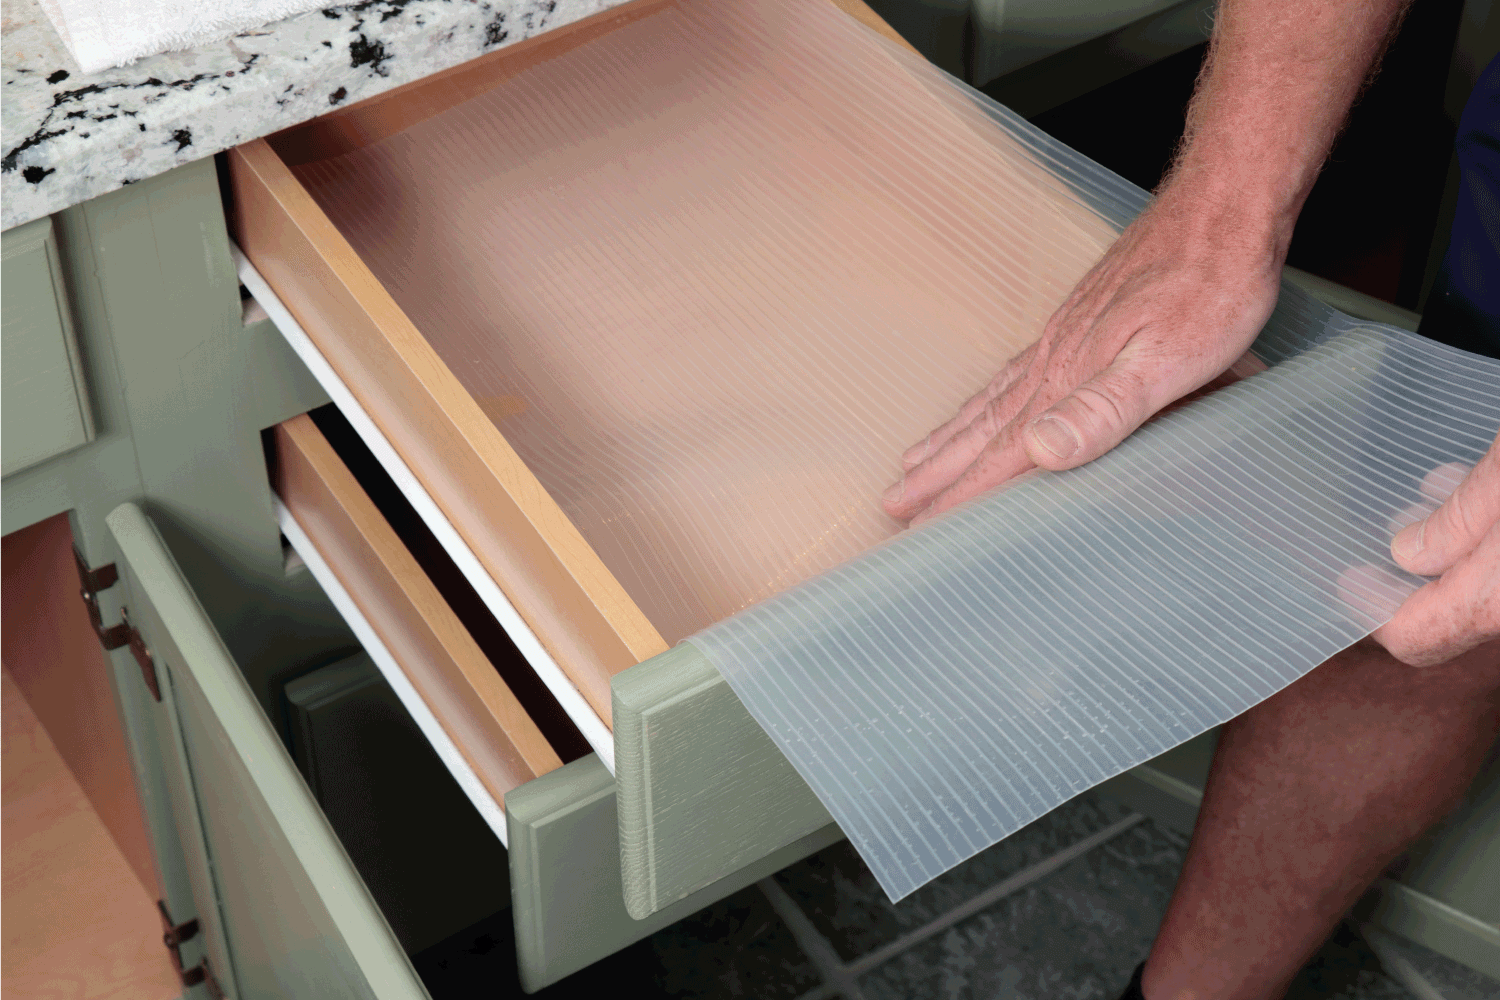 Caucasian Male Hands Placing Plastic Drawer Liner in a kitchen